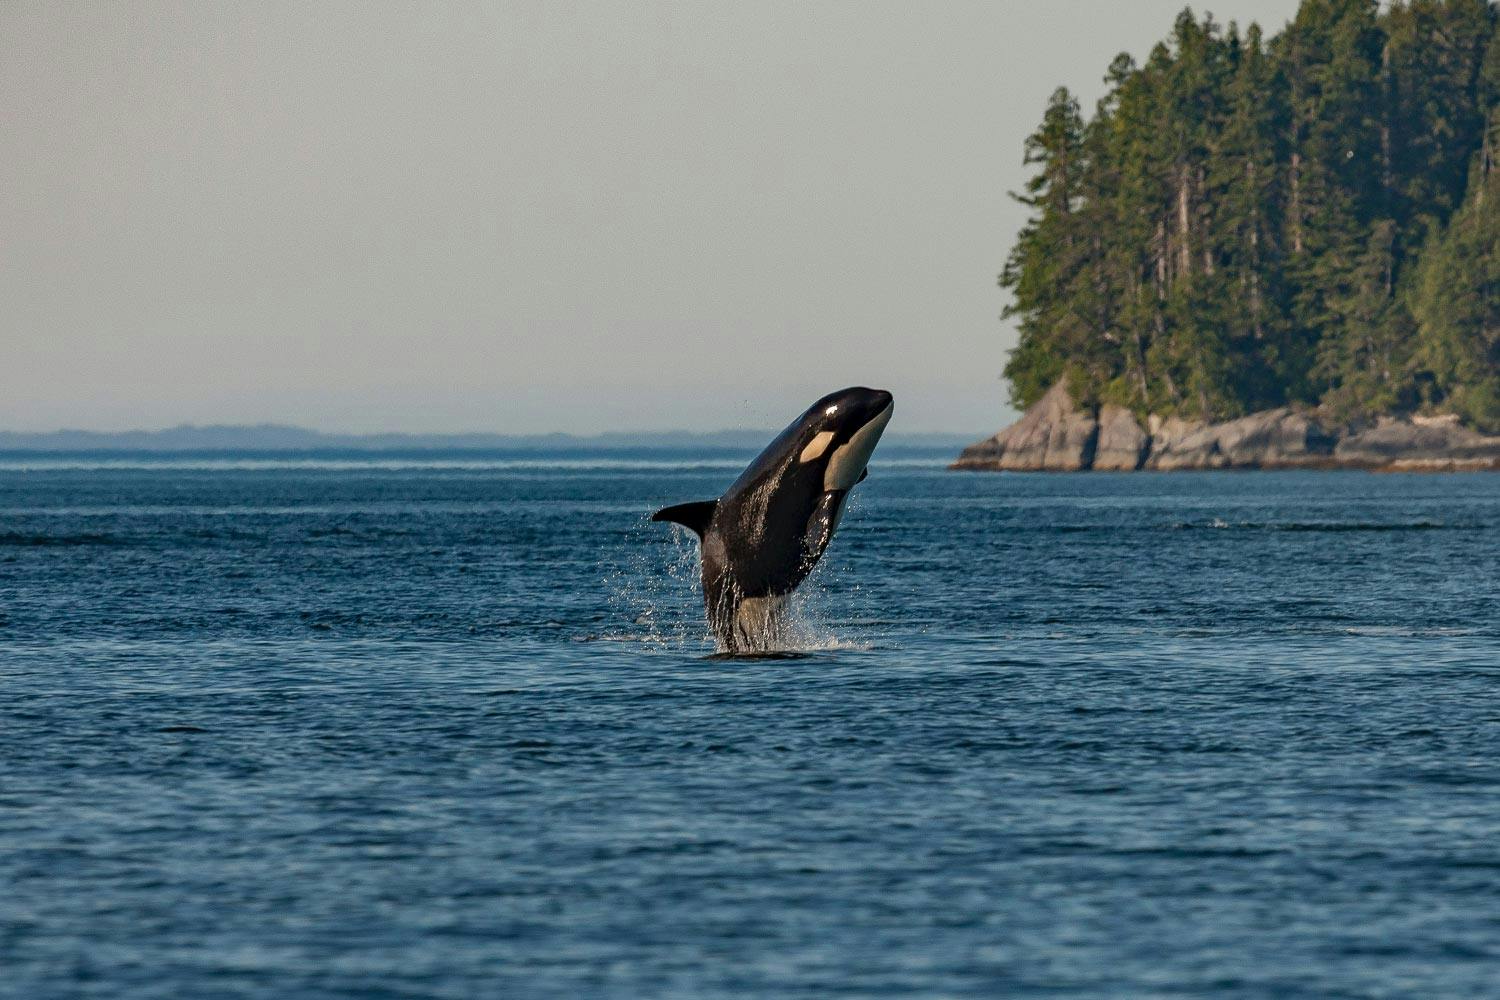 An orca leaps out of the water. A tree-covered, rocky outcrop sits in the distant background.